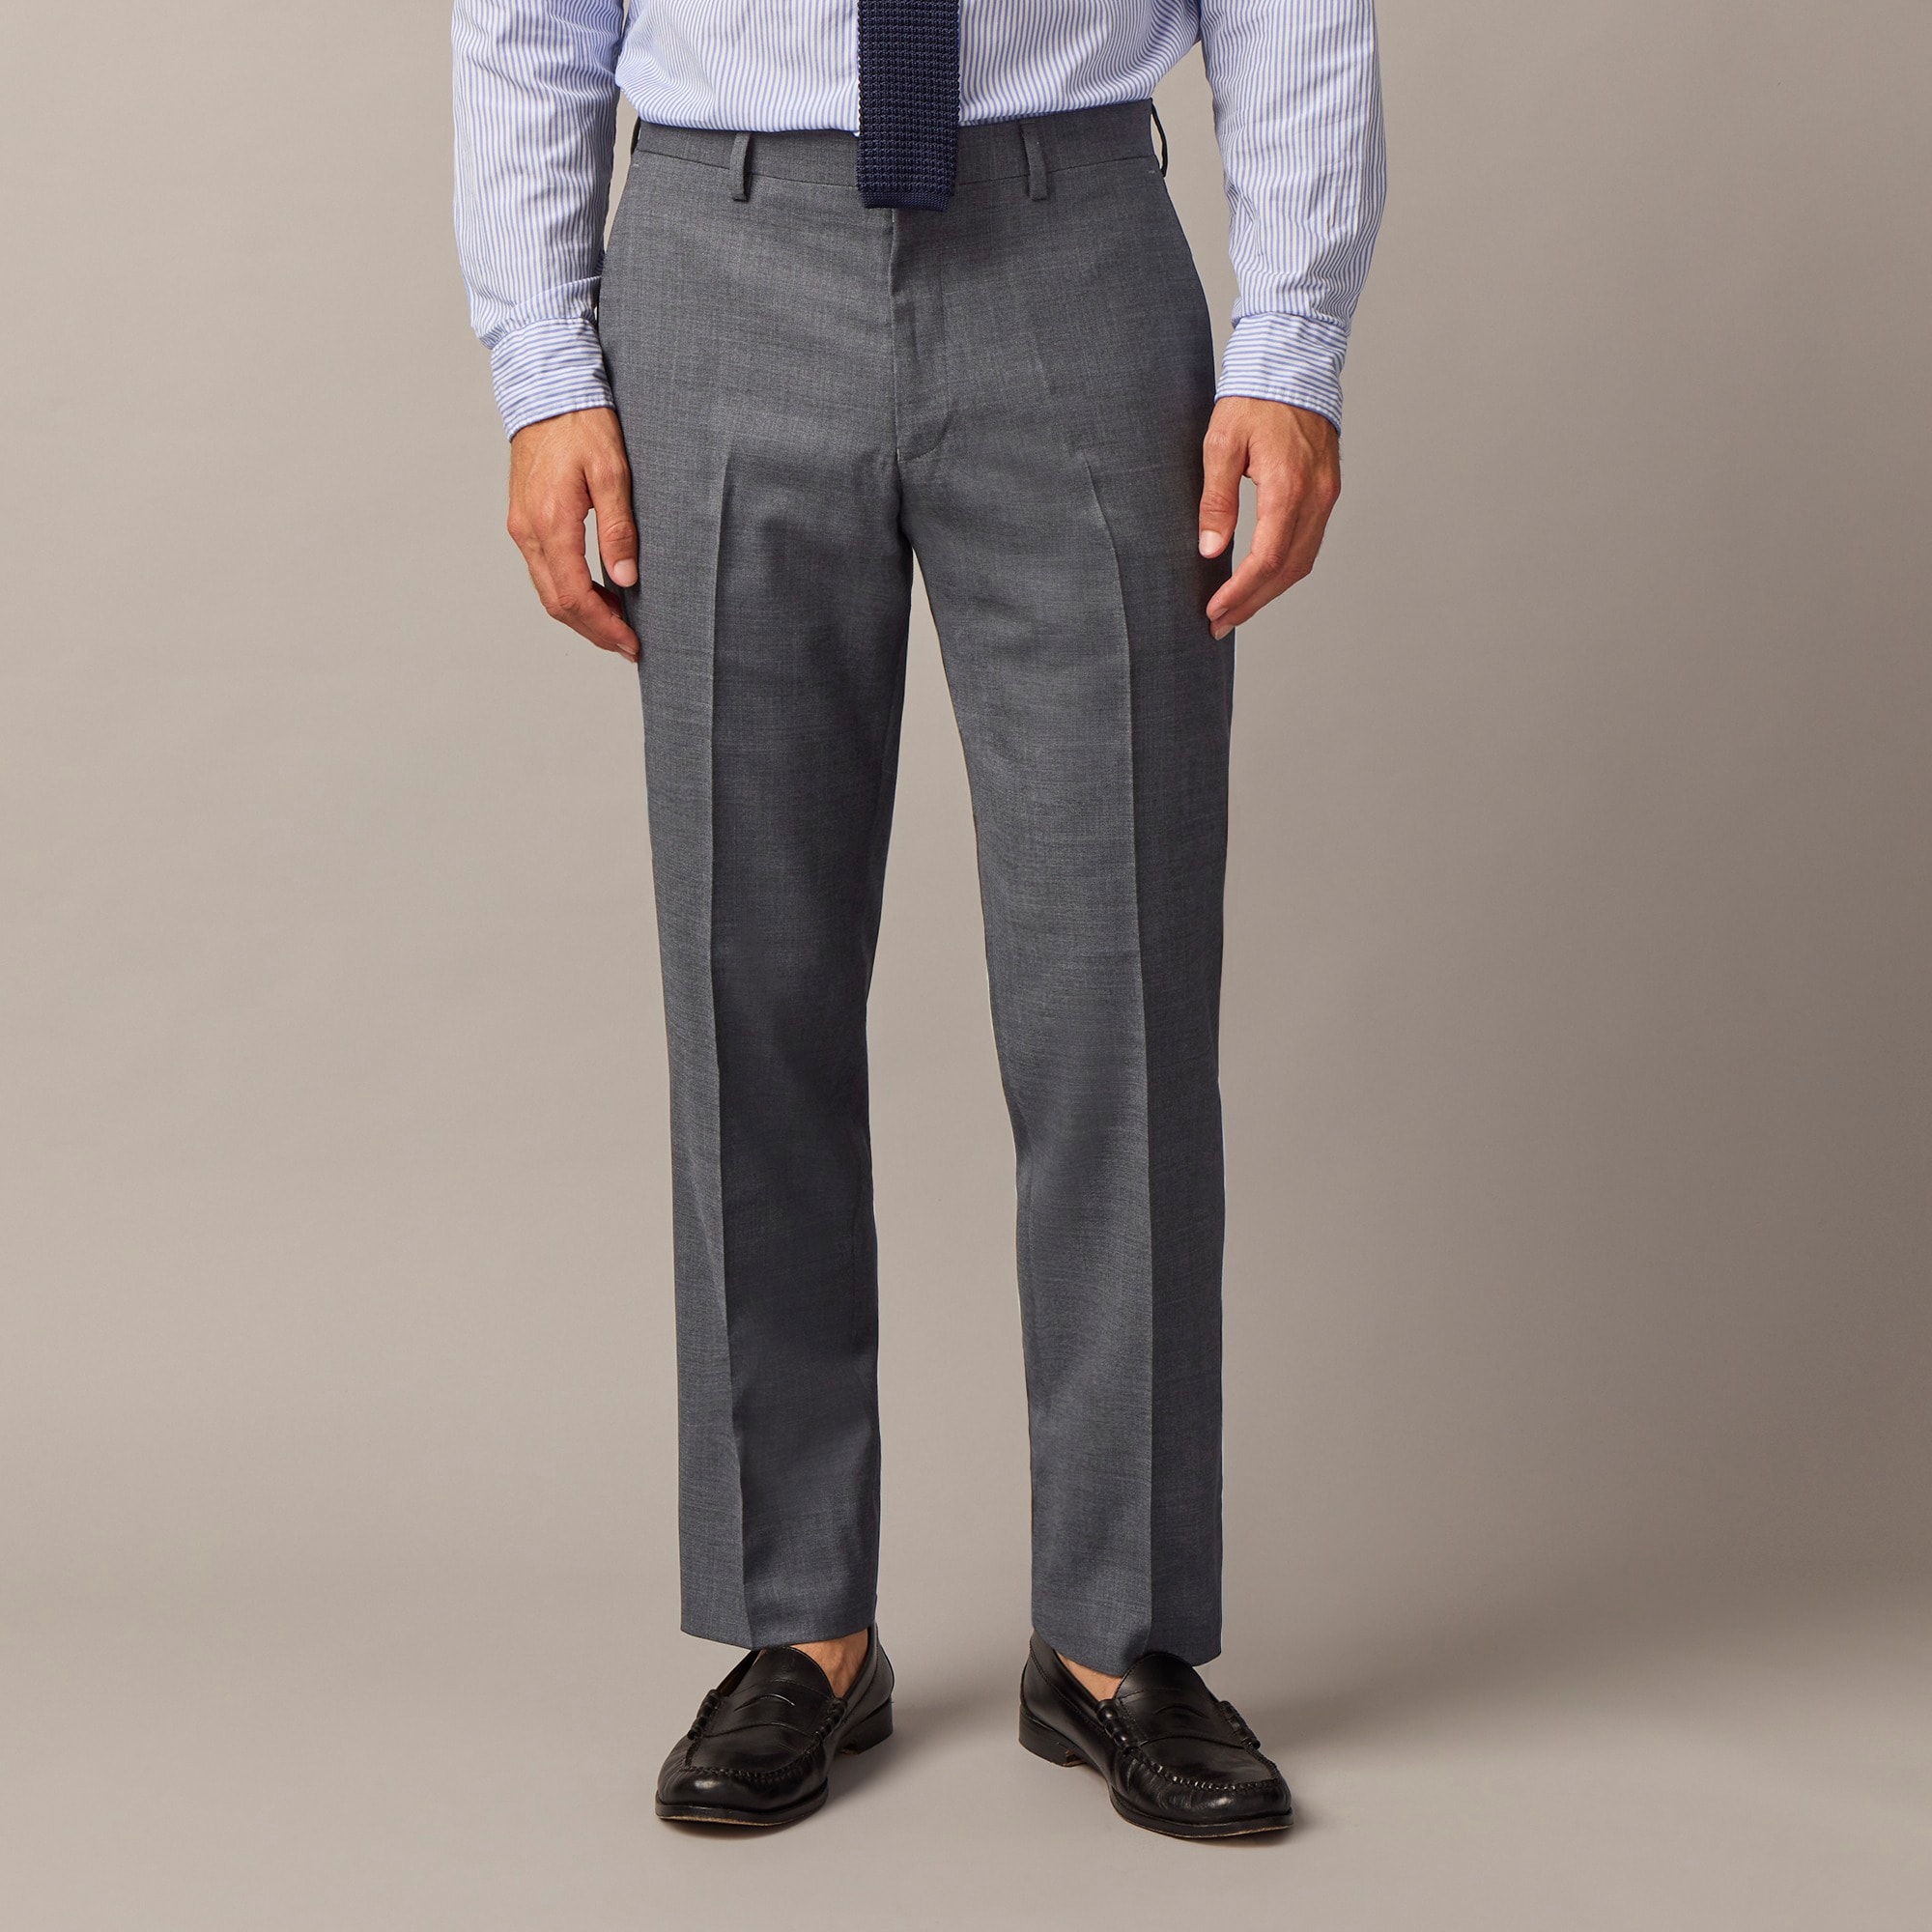 j.crew: crosby suit pant in italian stretch worsted wool blend for men